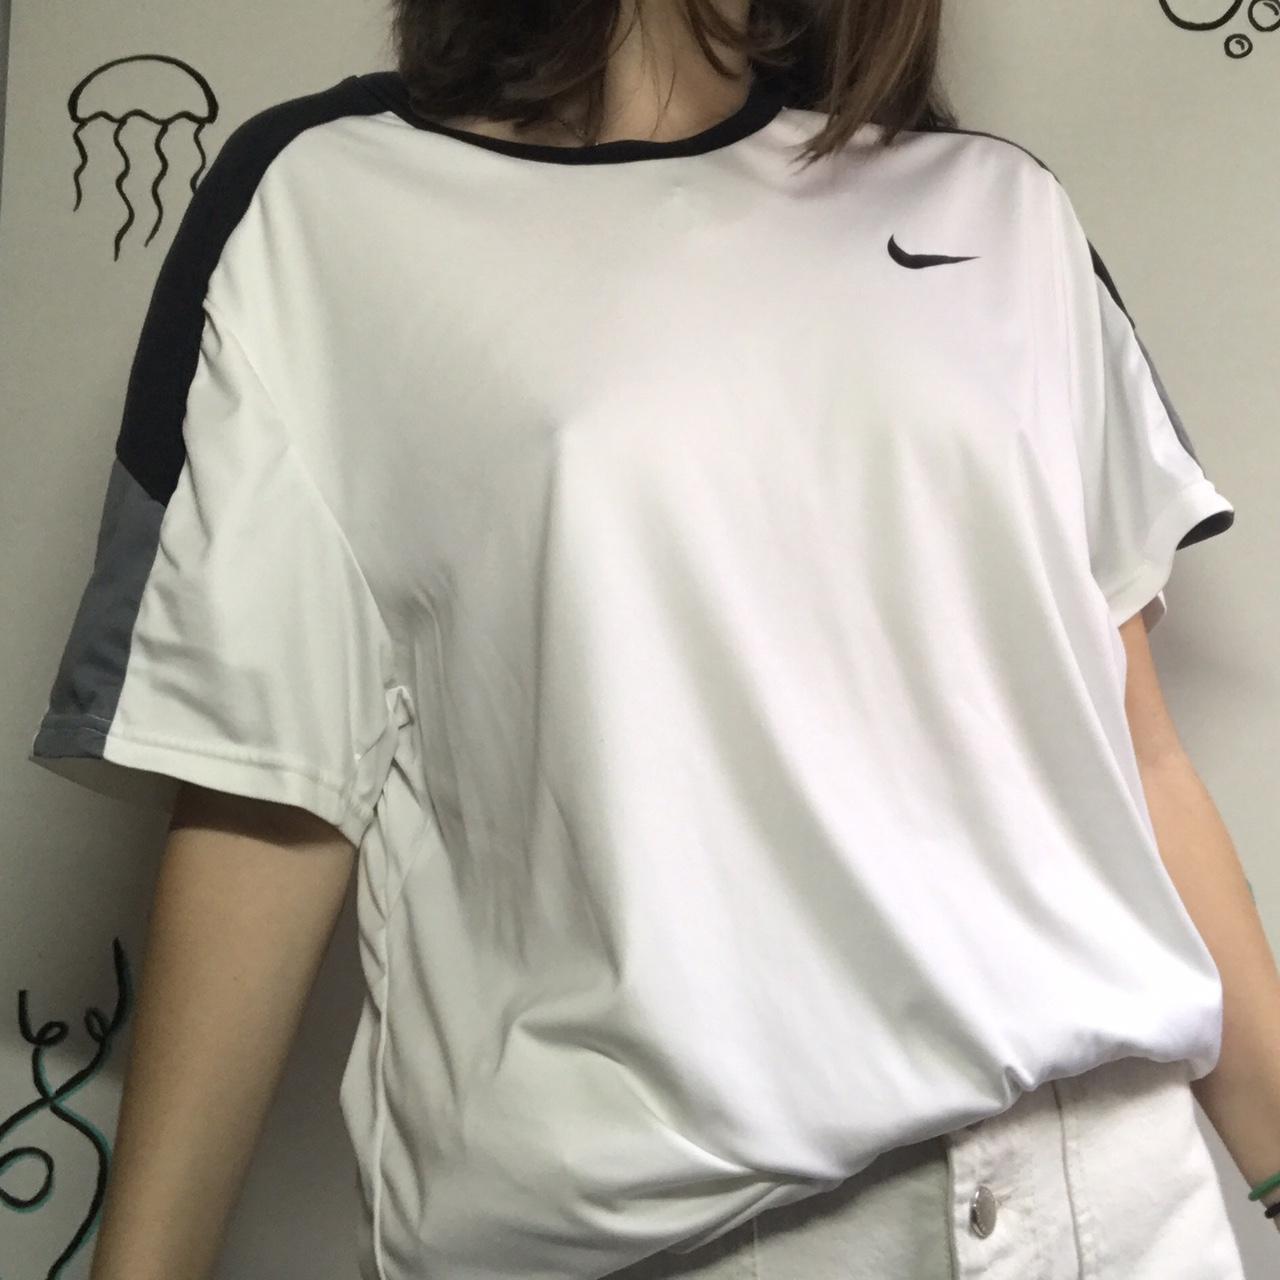 retro dry-fit nike athletic shirt //, black and grey